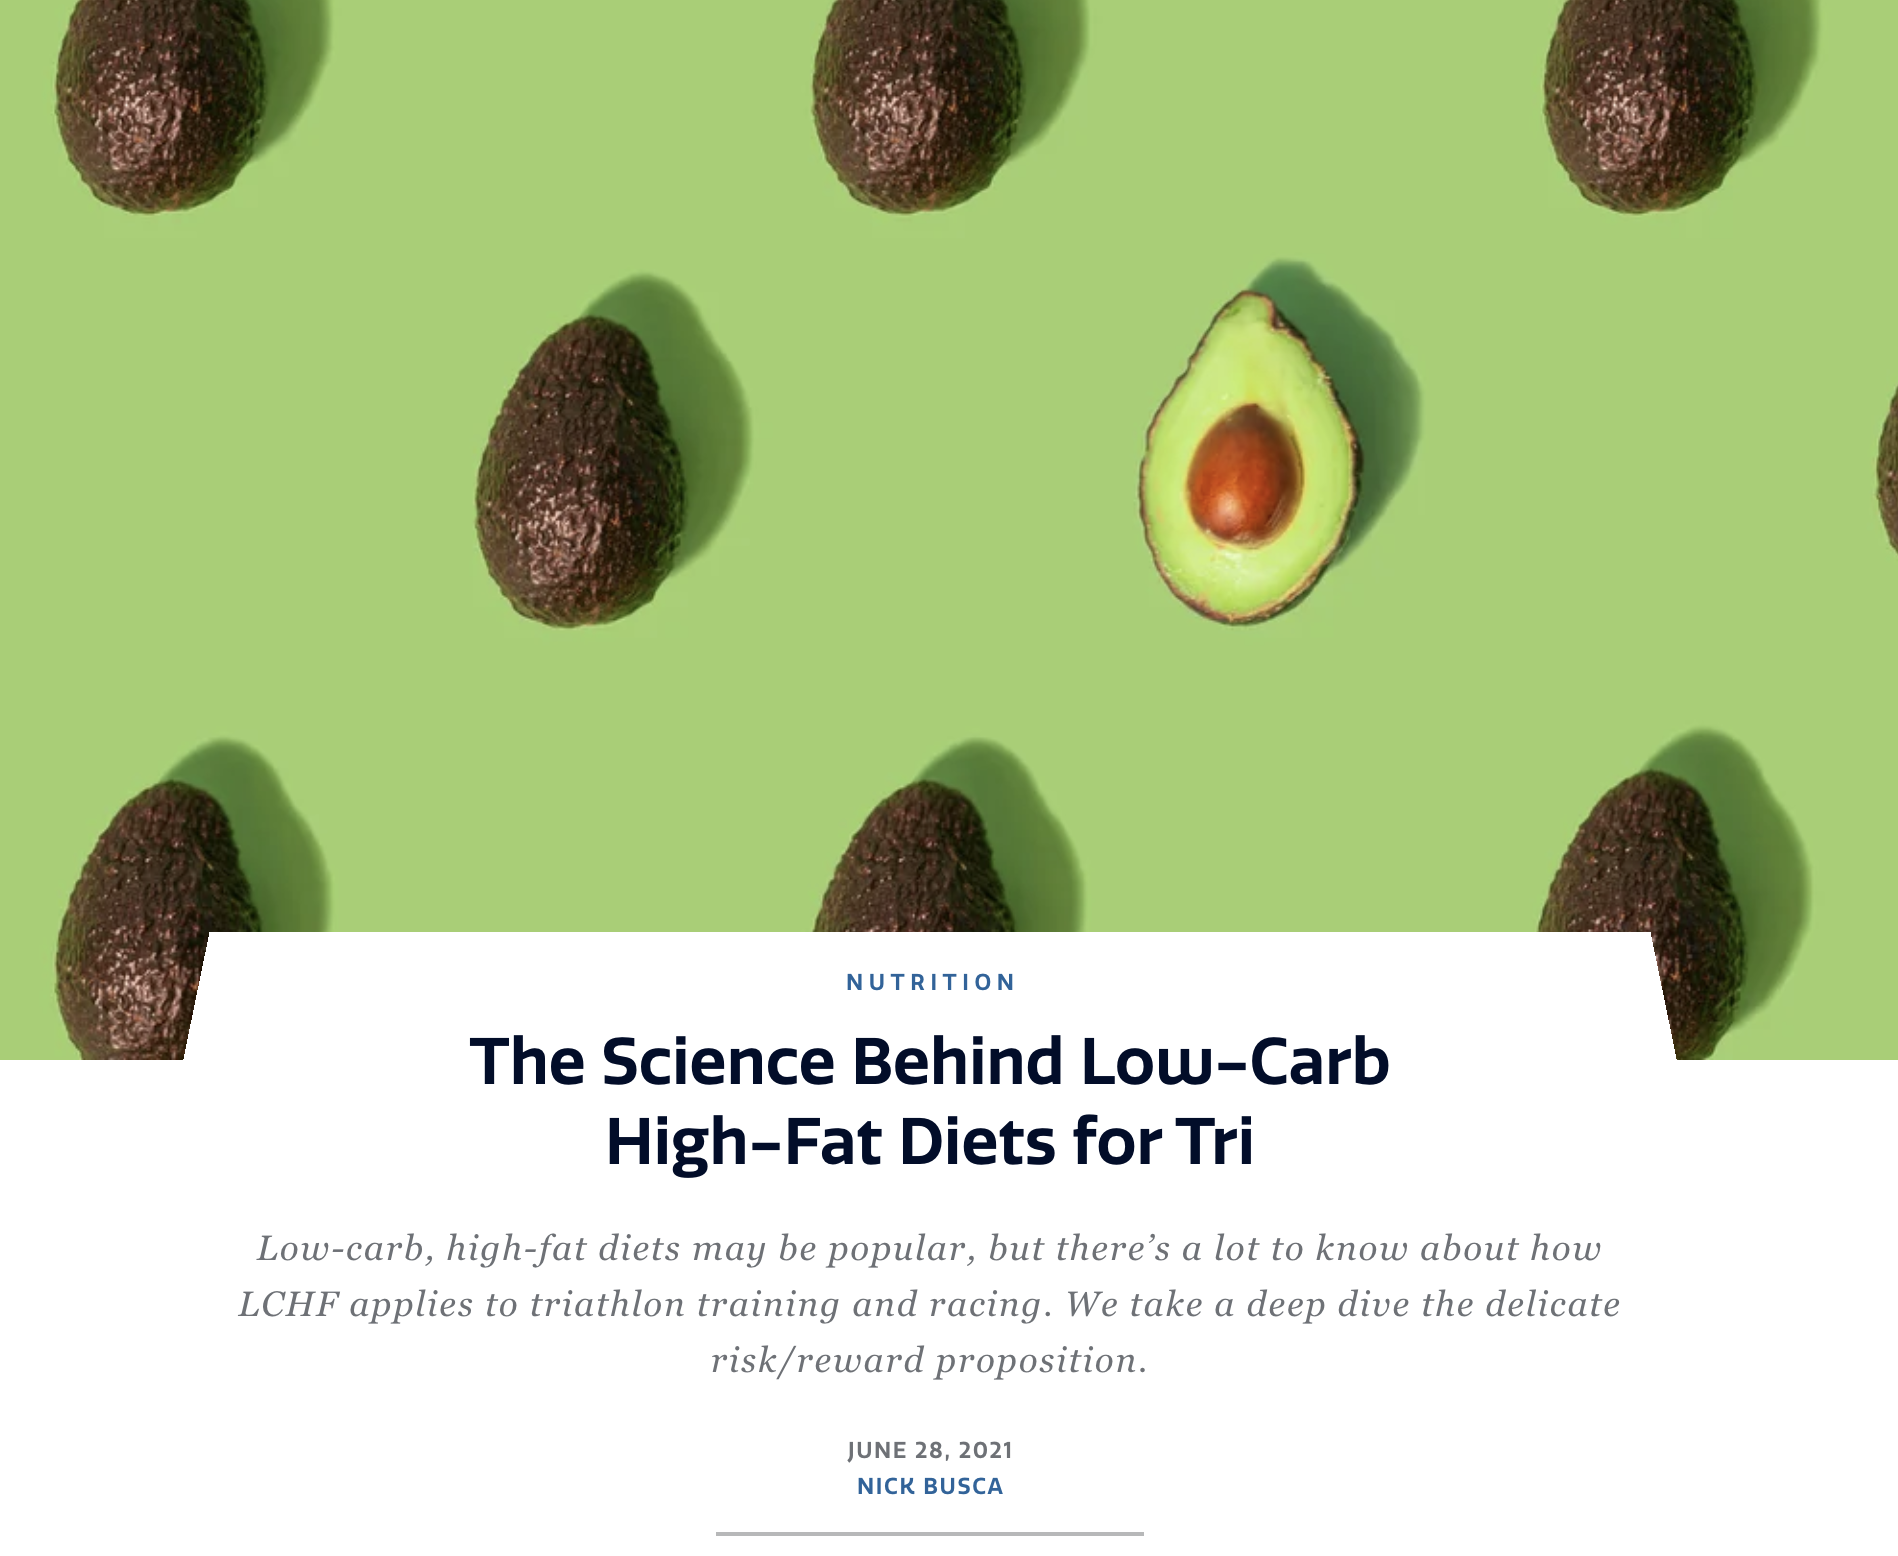 https://www.triathlete.com/nutrition/the-science-behind-low-carb-high-fat-diets-for-tri/